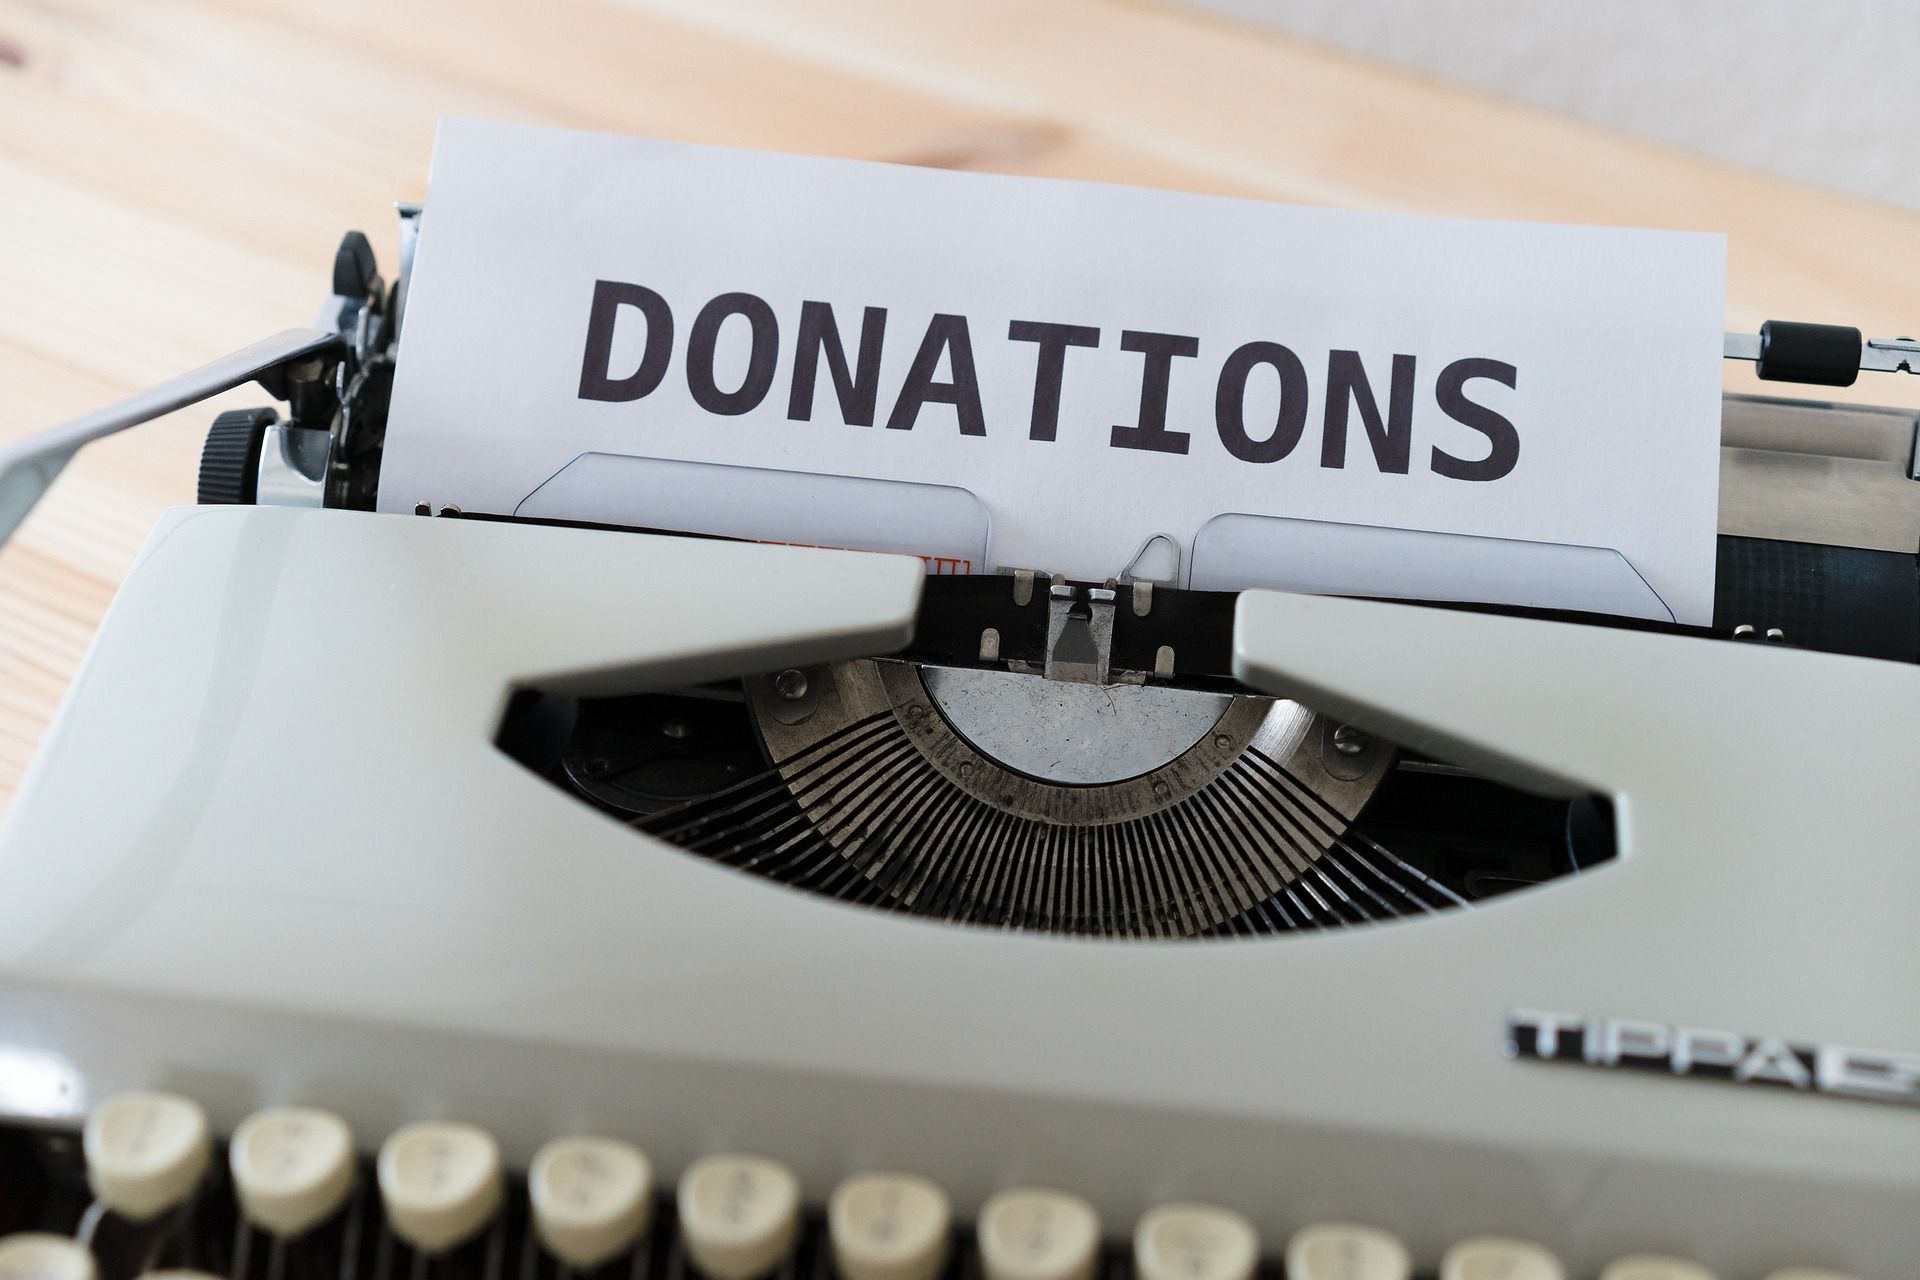 A typewriter with the word "Donations" written on; our Wills Solicitors in Preston discuss including charitable donations in your Will.